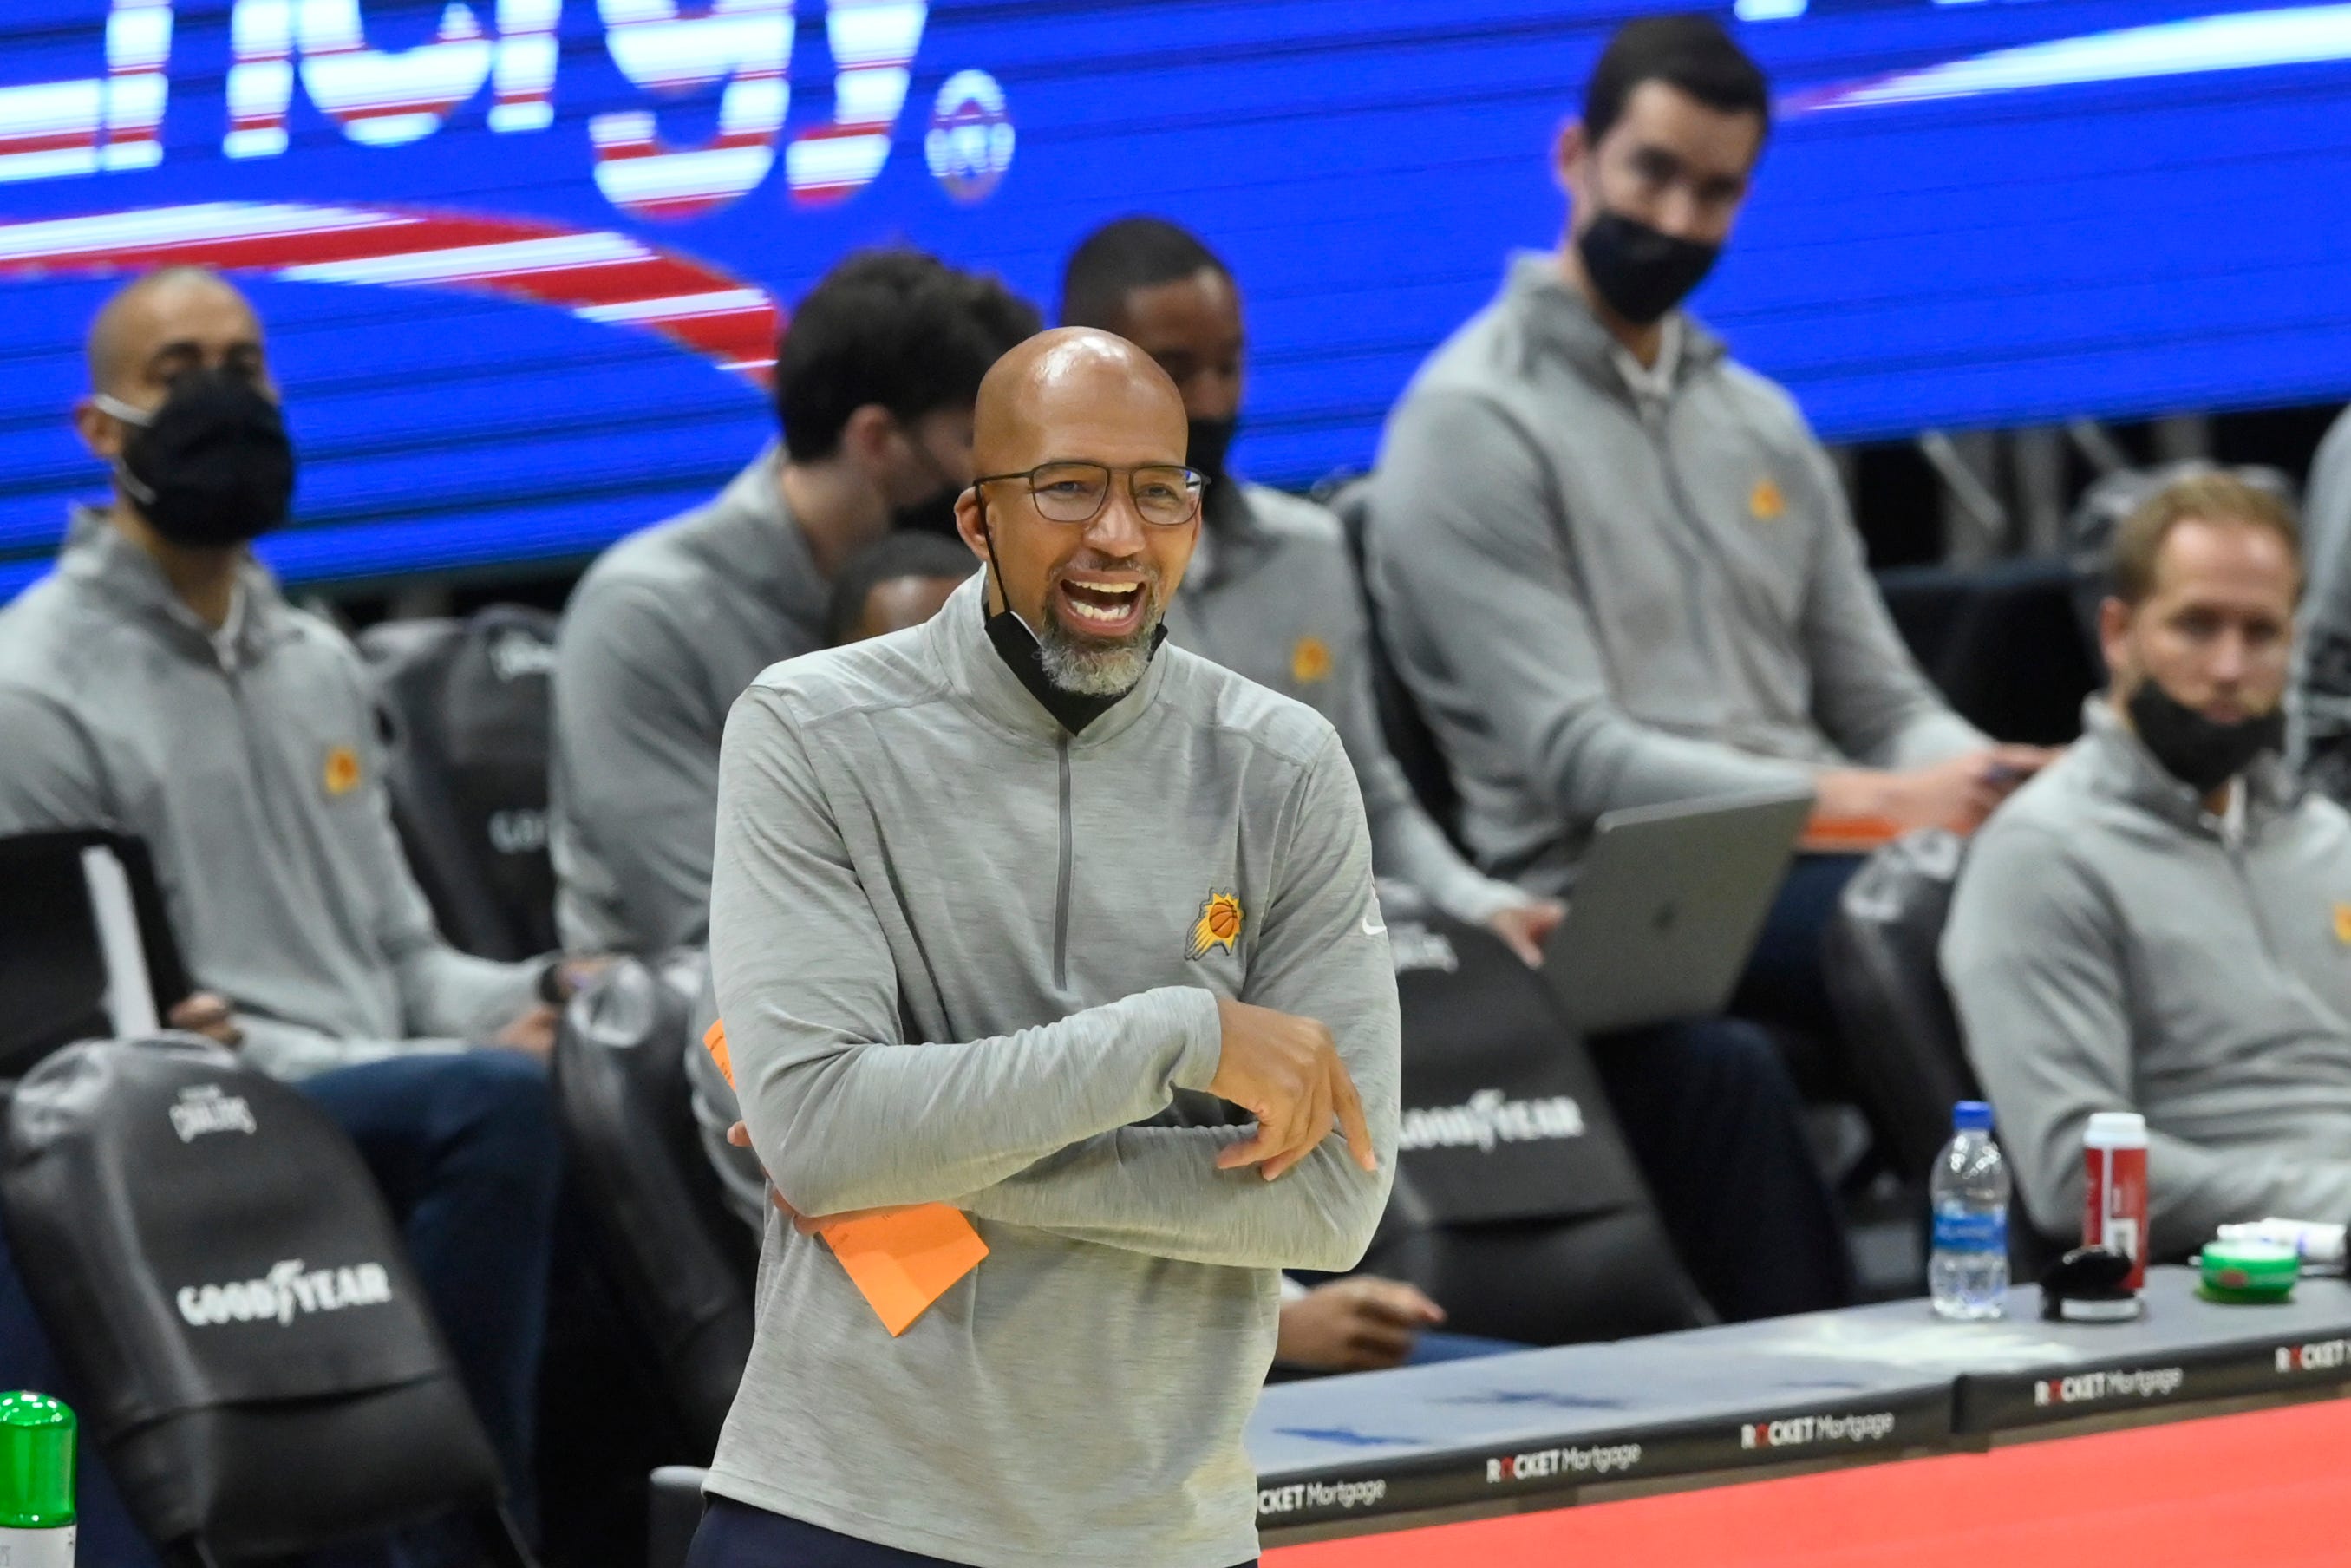 Phoenix Suns head coach Monty Williams reacts in the third quarter against the Cleveland Cavaliers at Rocket Mortgage FieldHouse.